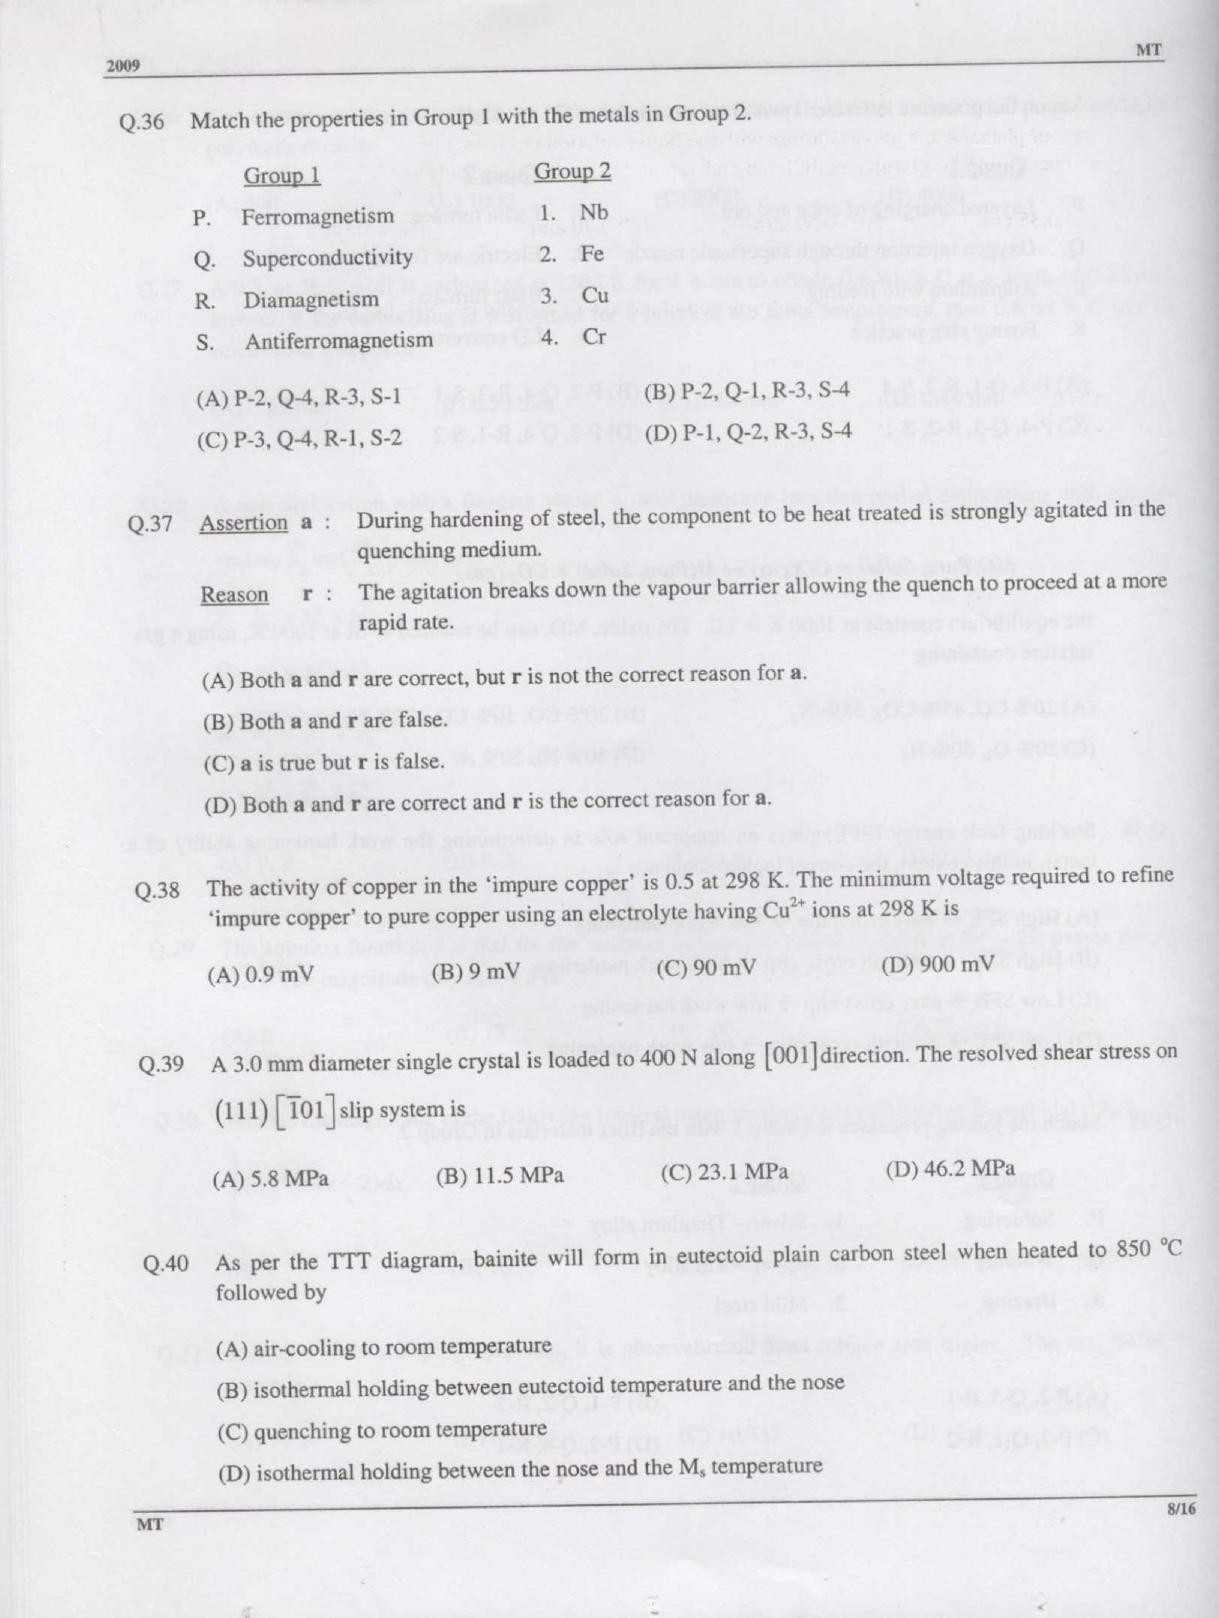 GATE 2009 Metallurgical Engineering (MT) Question Paper with Answer Key - Page 8